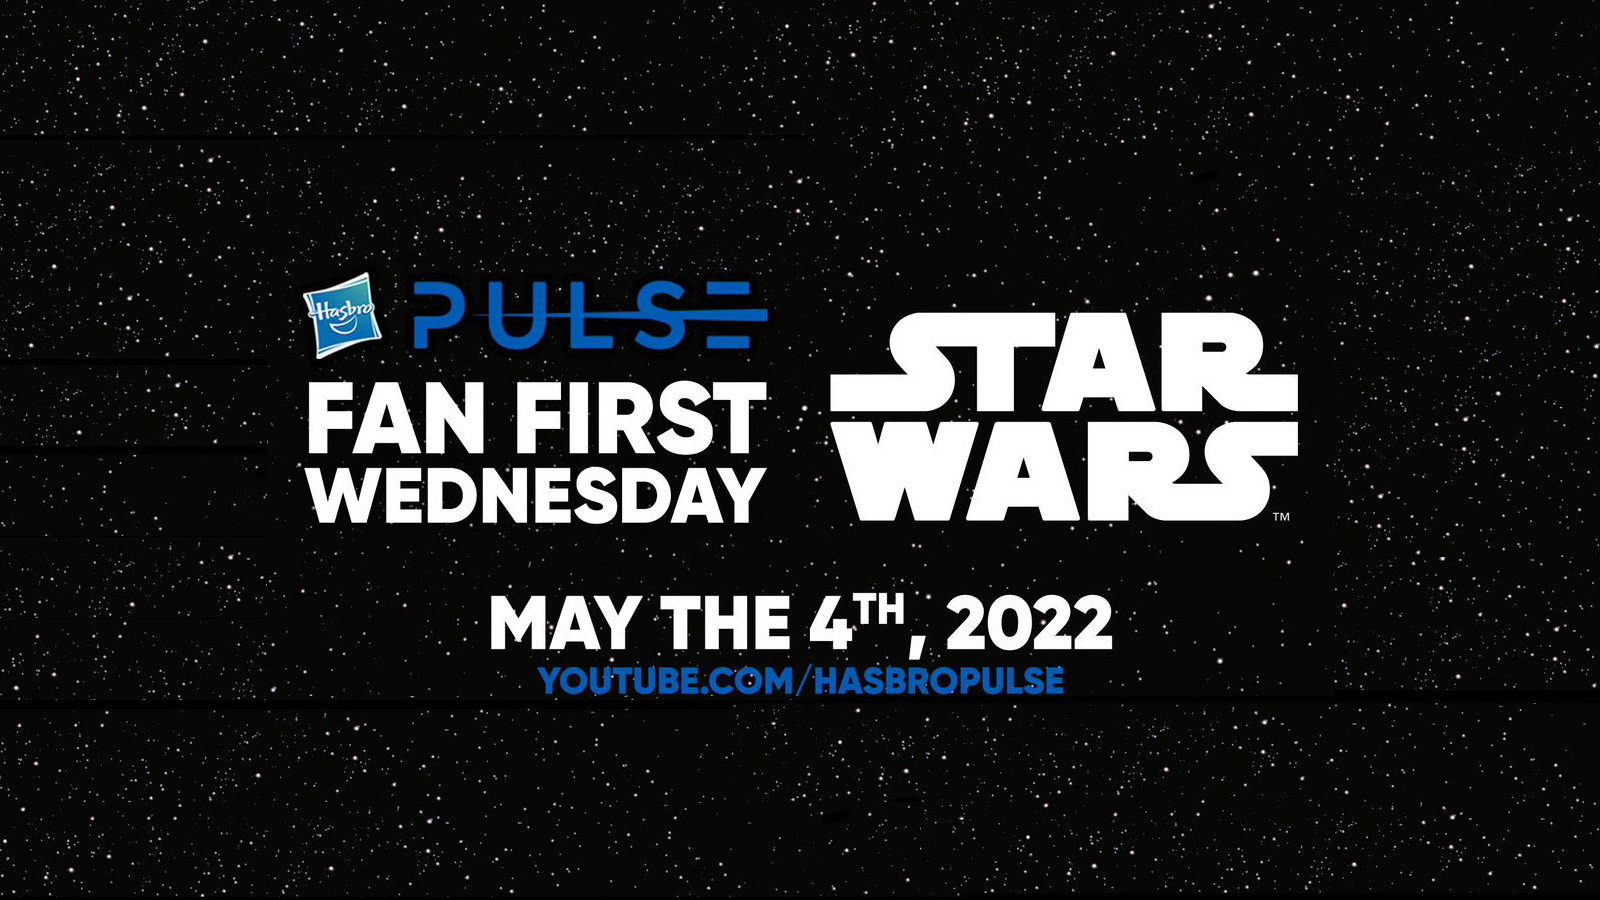 Hasbro Pulse Star Wars Fan First Wednesday - May 4th 2022 At 10:00am ET